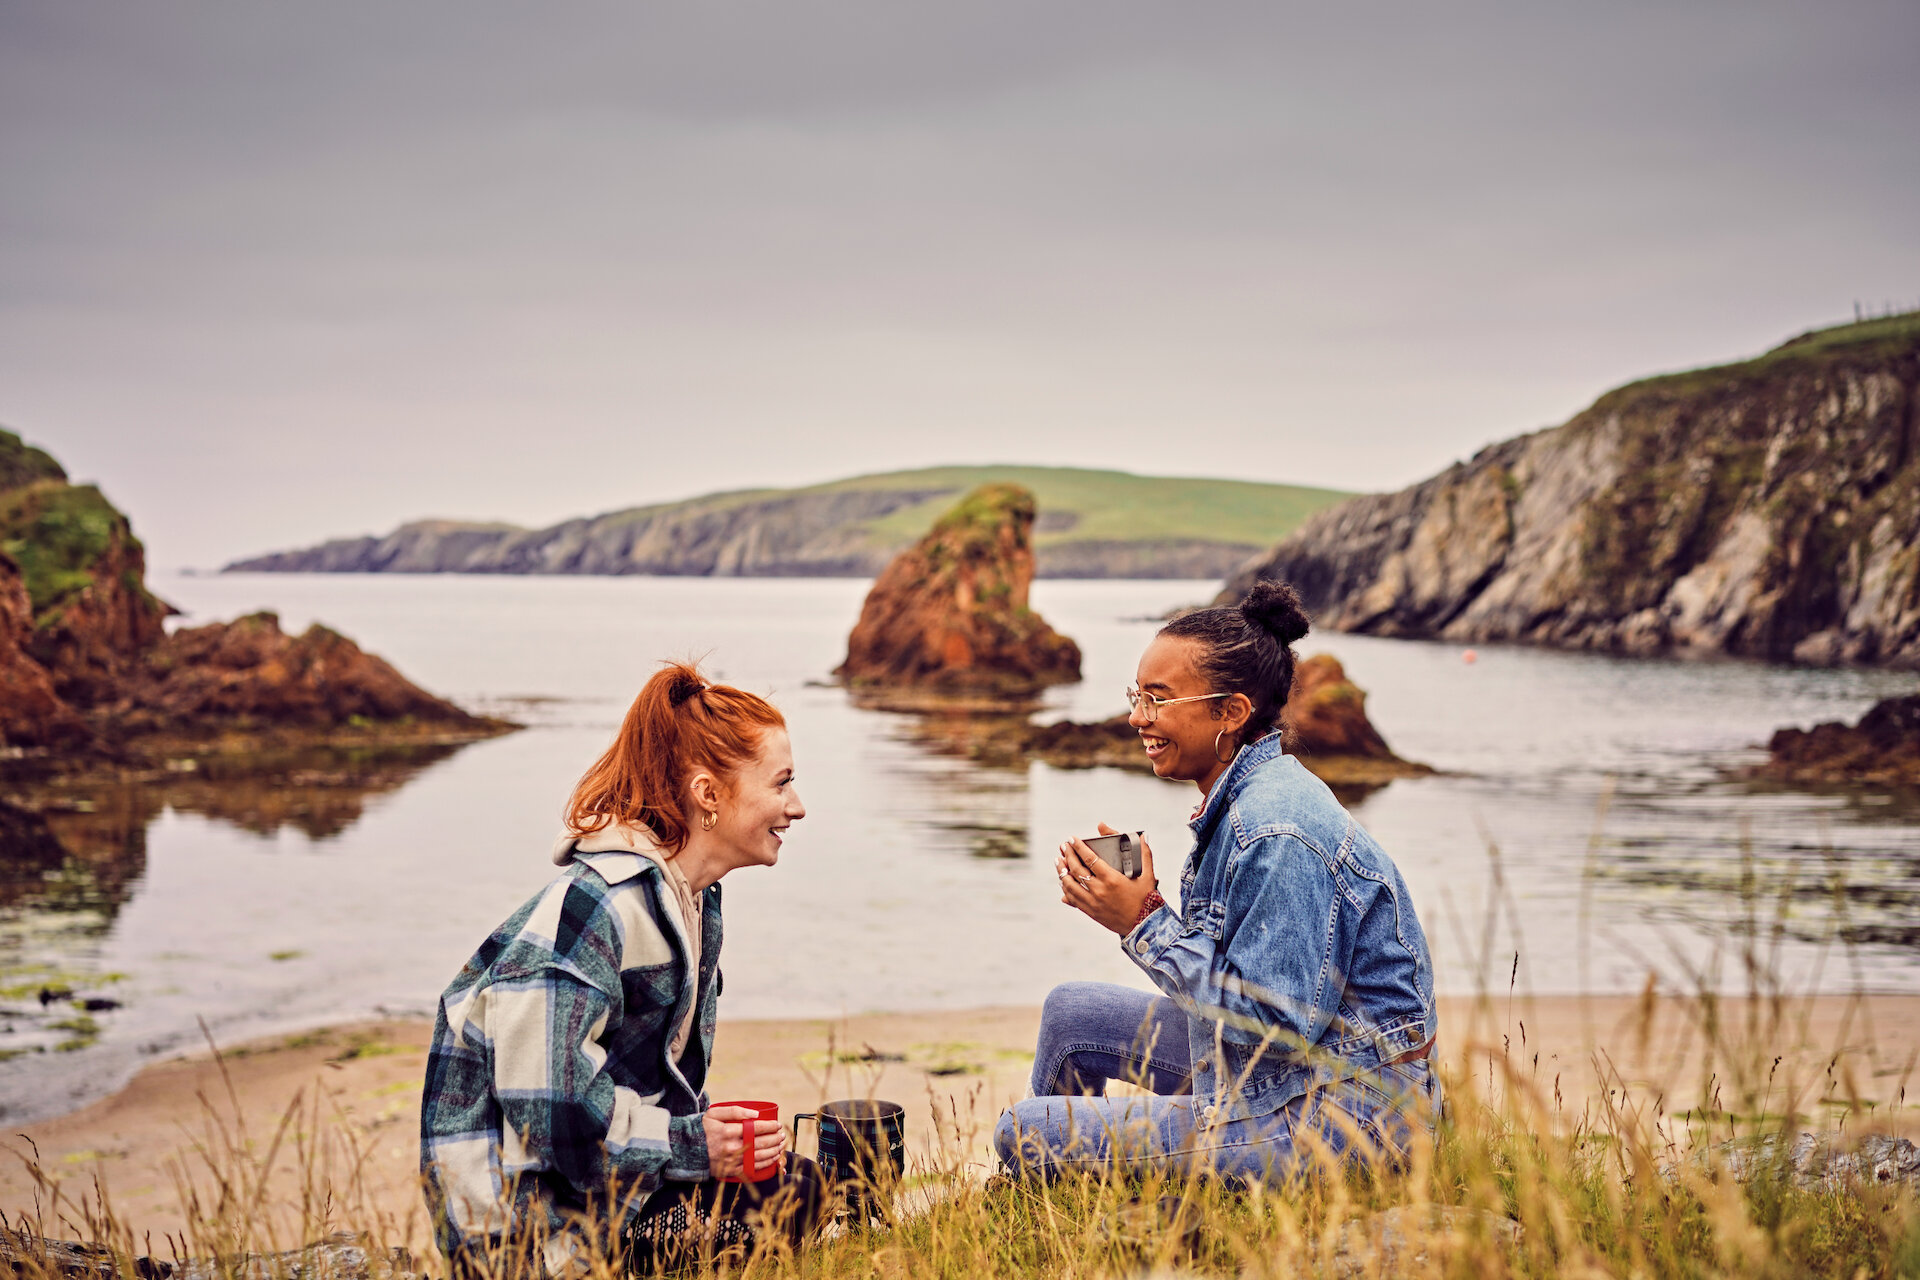 Spring in Shetland is a fantastic time to enjoy a picnic on the beach. | The gift of daylight